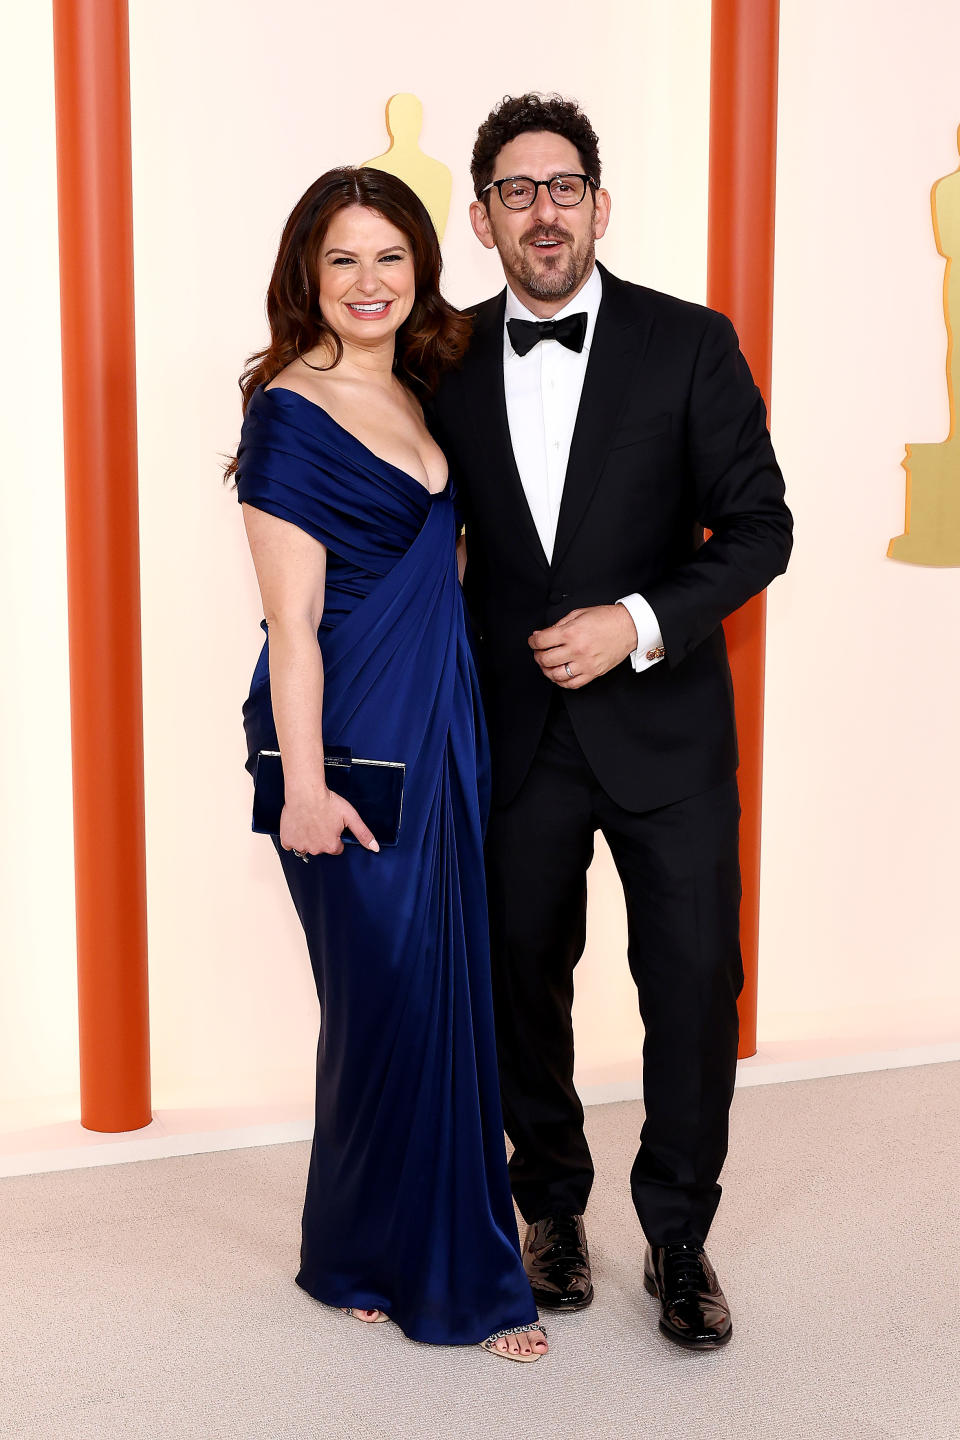 HOLLYWOOD, CALIFORNIA - MARCH 12: (L-R) Katie Lowes and Adam Shapiro attend the 95th Annual Academy Awards on March 12, 2023 in Hollywood, California. (Photo by Arturo Holmes/Getty Images )